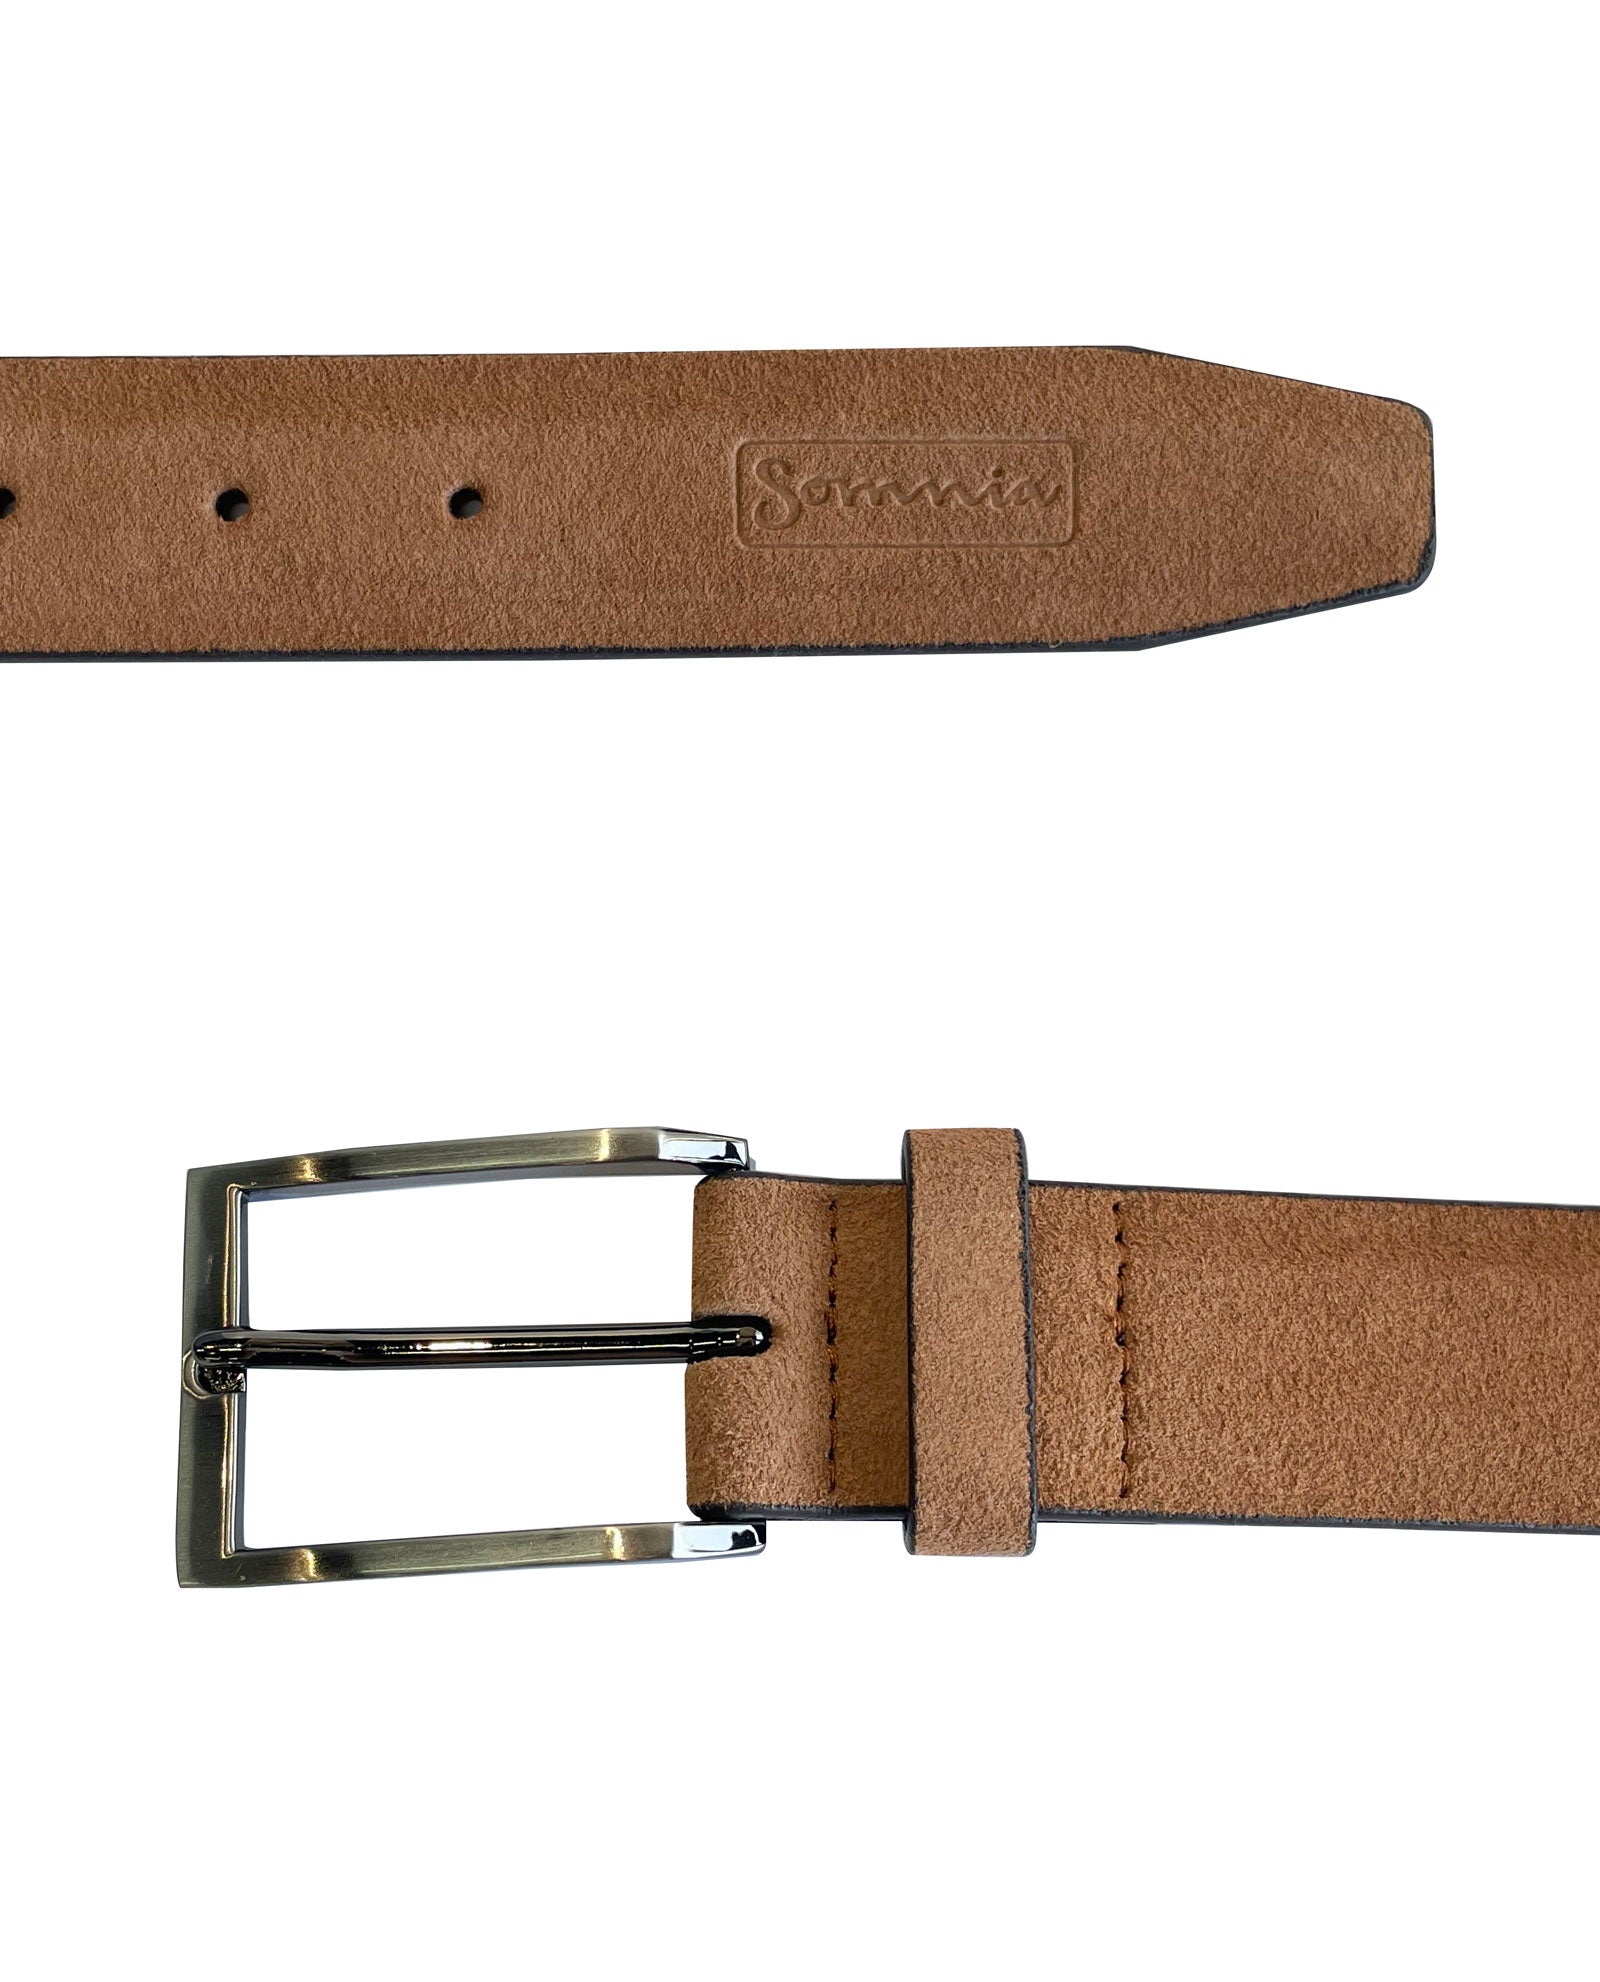 Gold and Suede Leather Belt